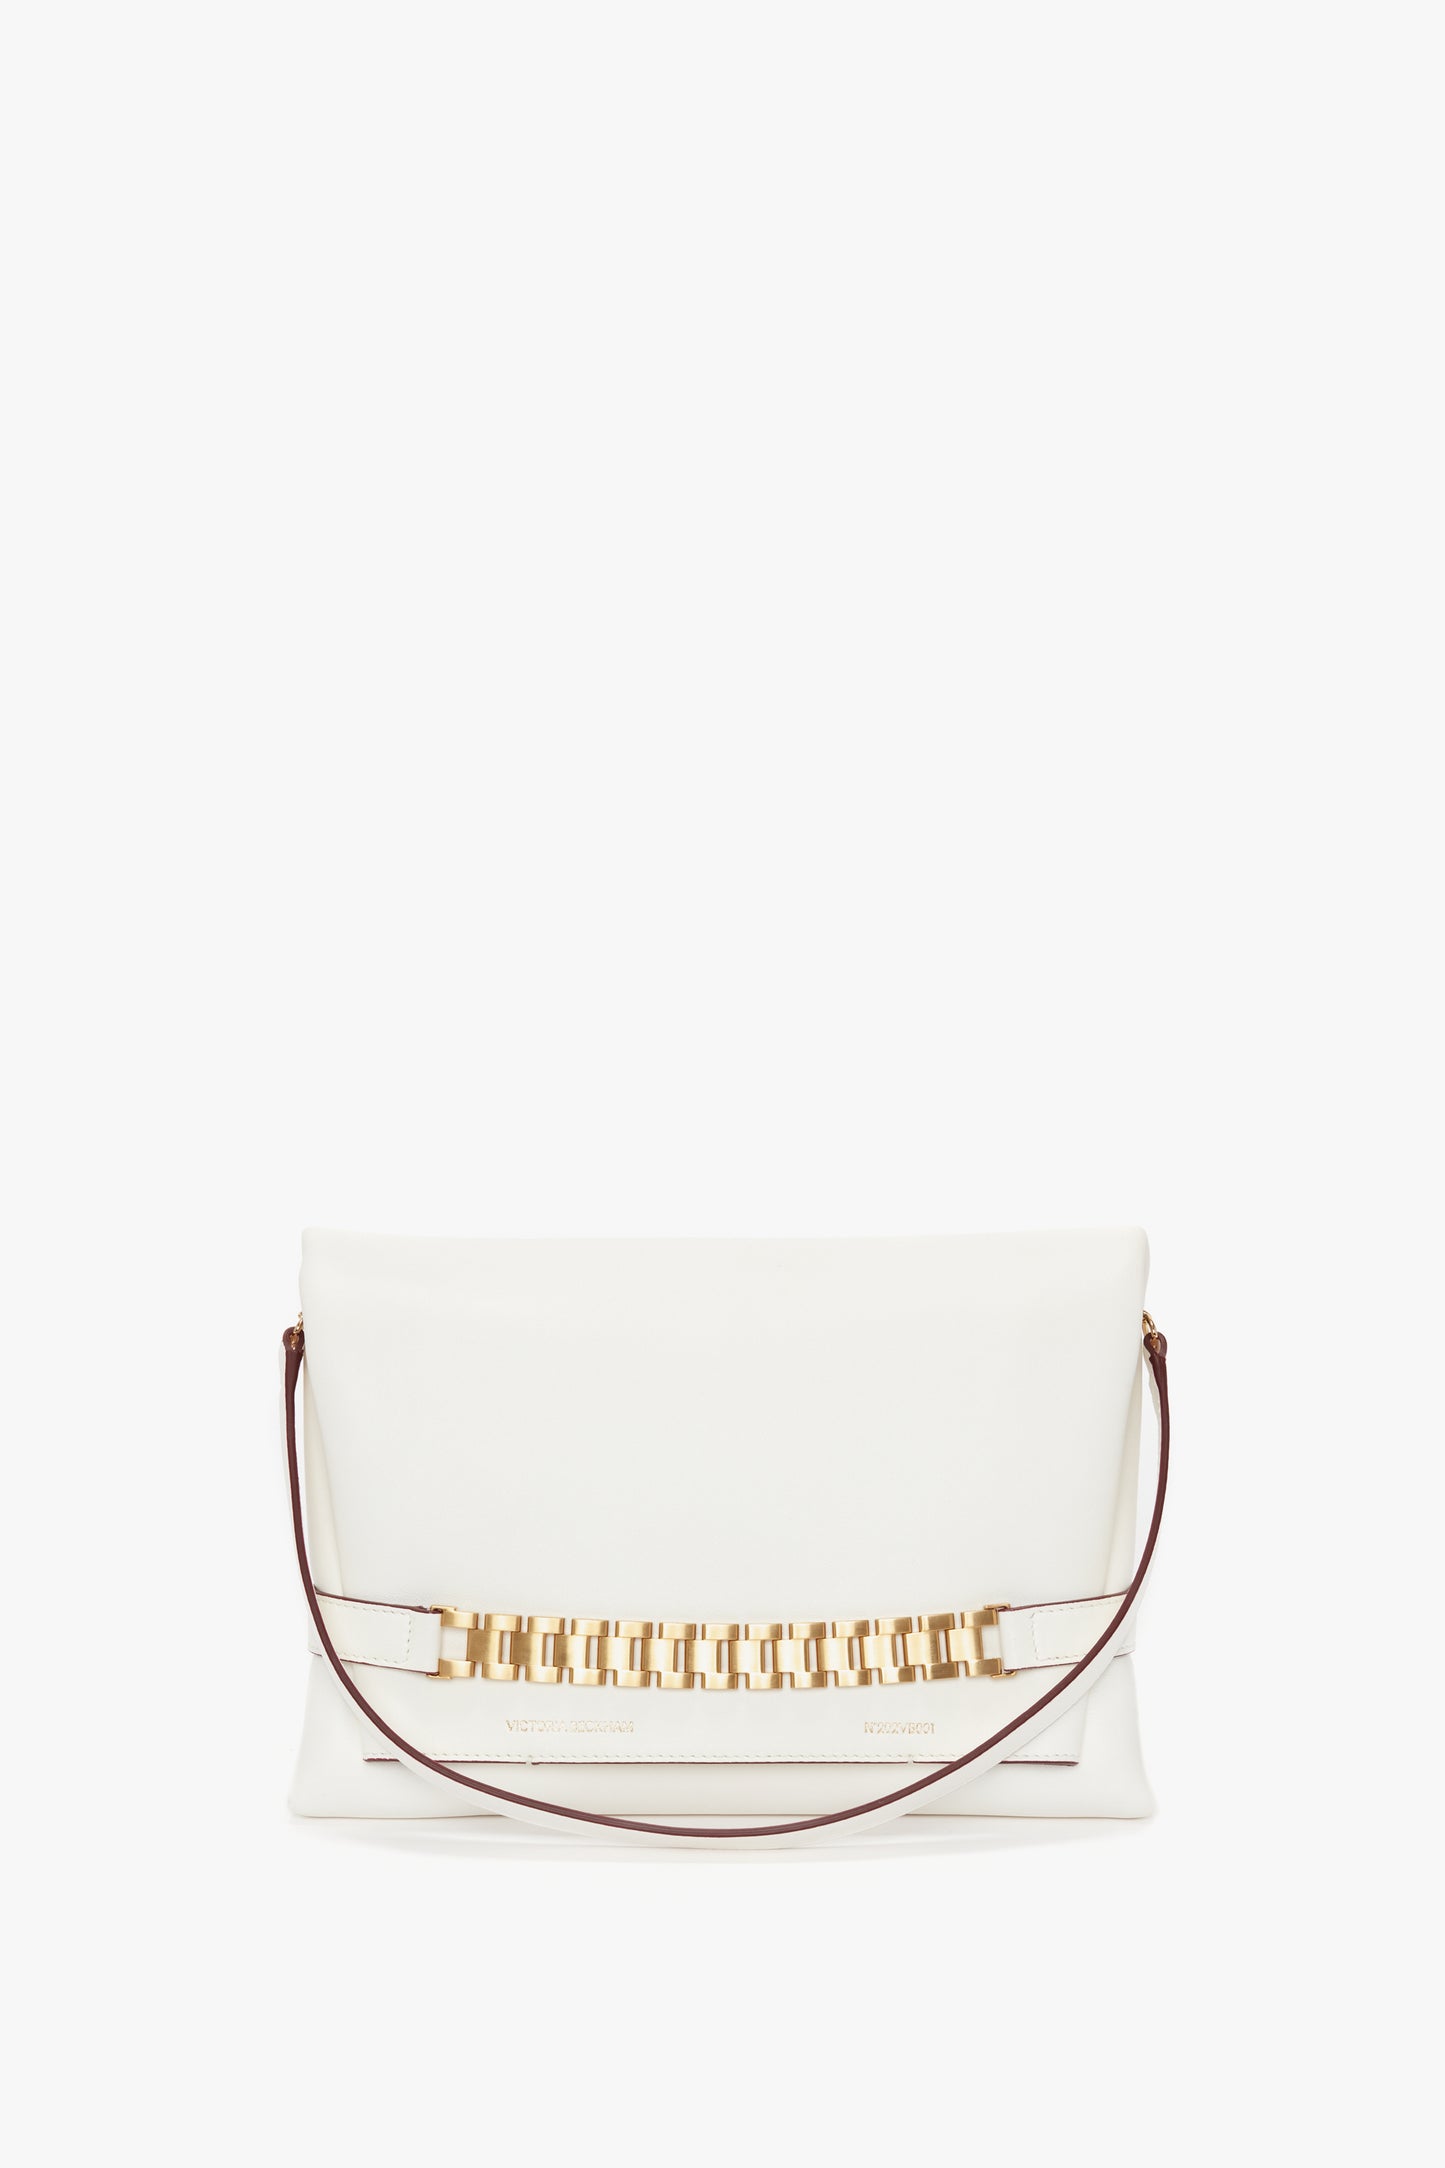 White Nappa leather chain pouch with strap, isolated on a white background by Victoria Beckham.